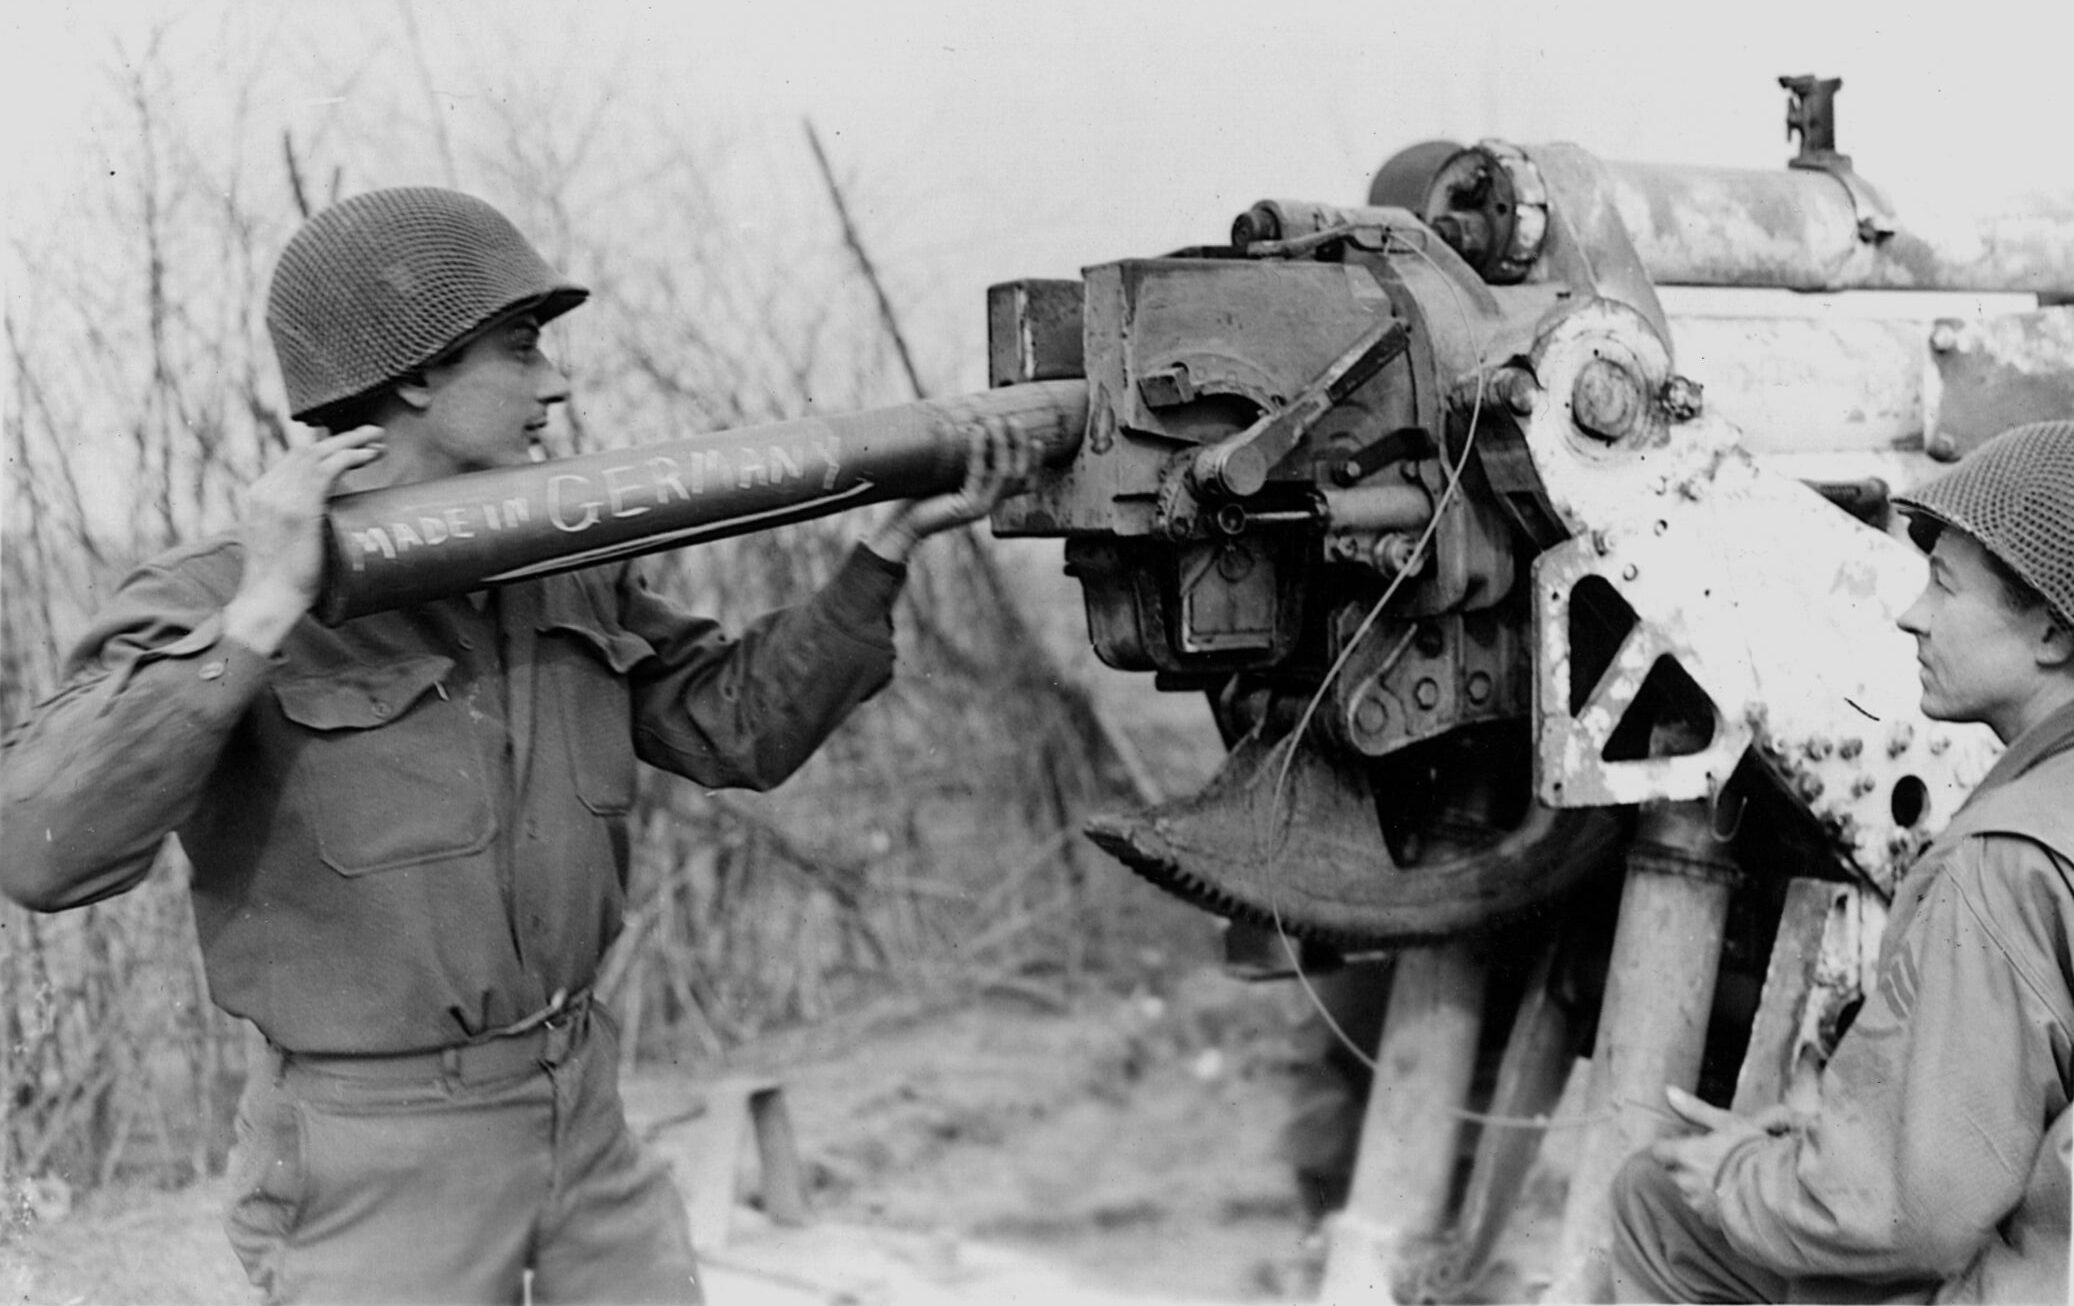 Turning the enemy’s own 88mm gun on them, a soldier loads the notorious weapon with a shell inscribed “Made in Germany” and prepares to fire across the Rhine River.